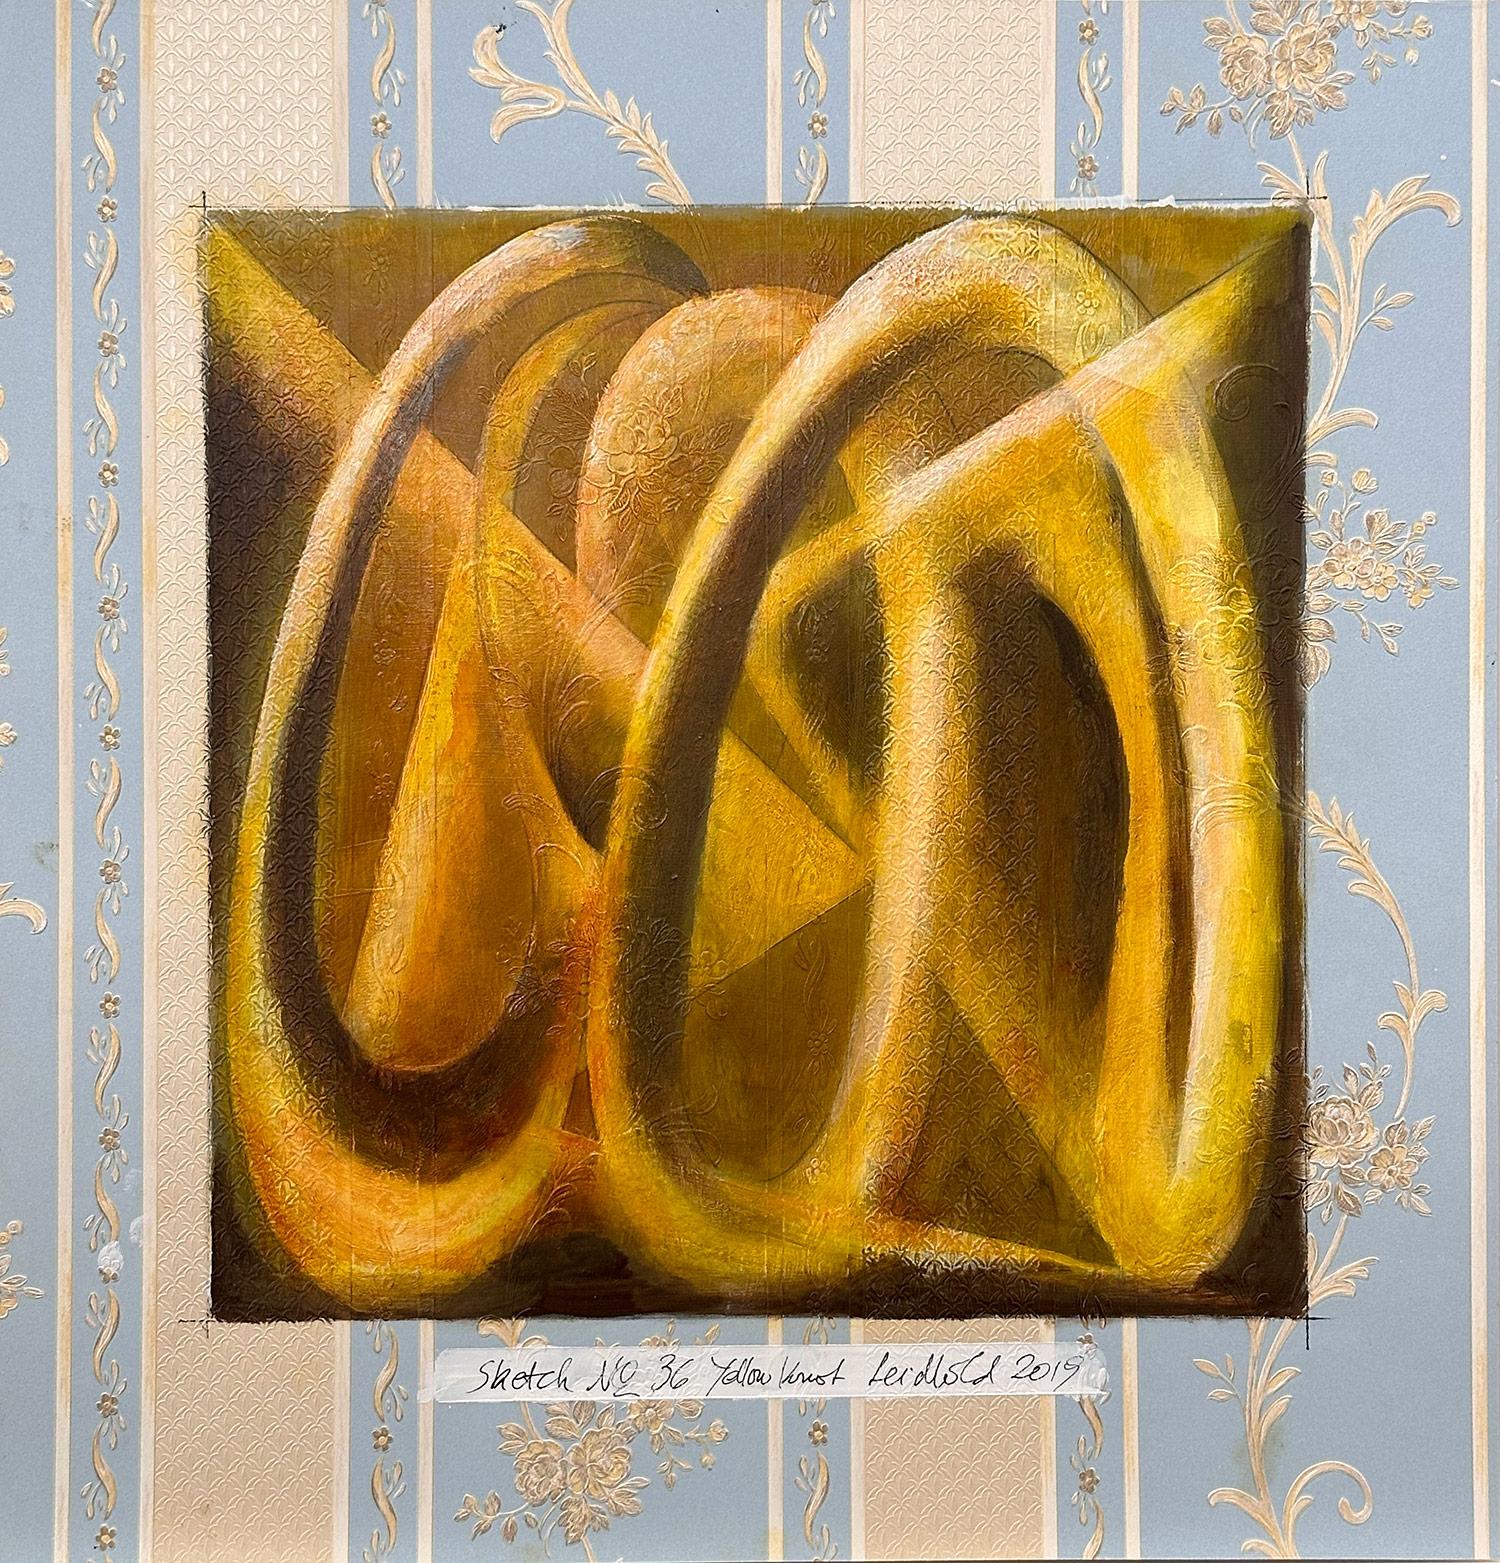 "Sketch No.36 Yellow Knot" Abstract Representational Painting Work on Wallpaper